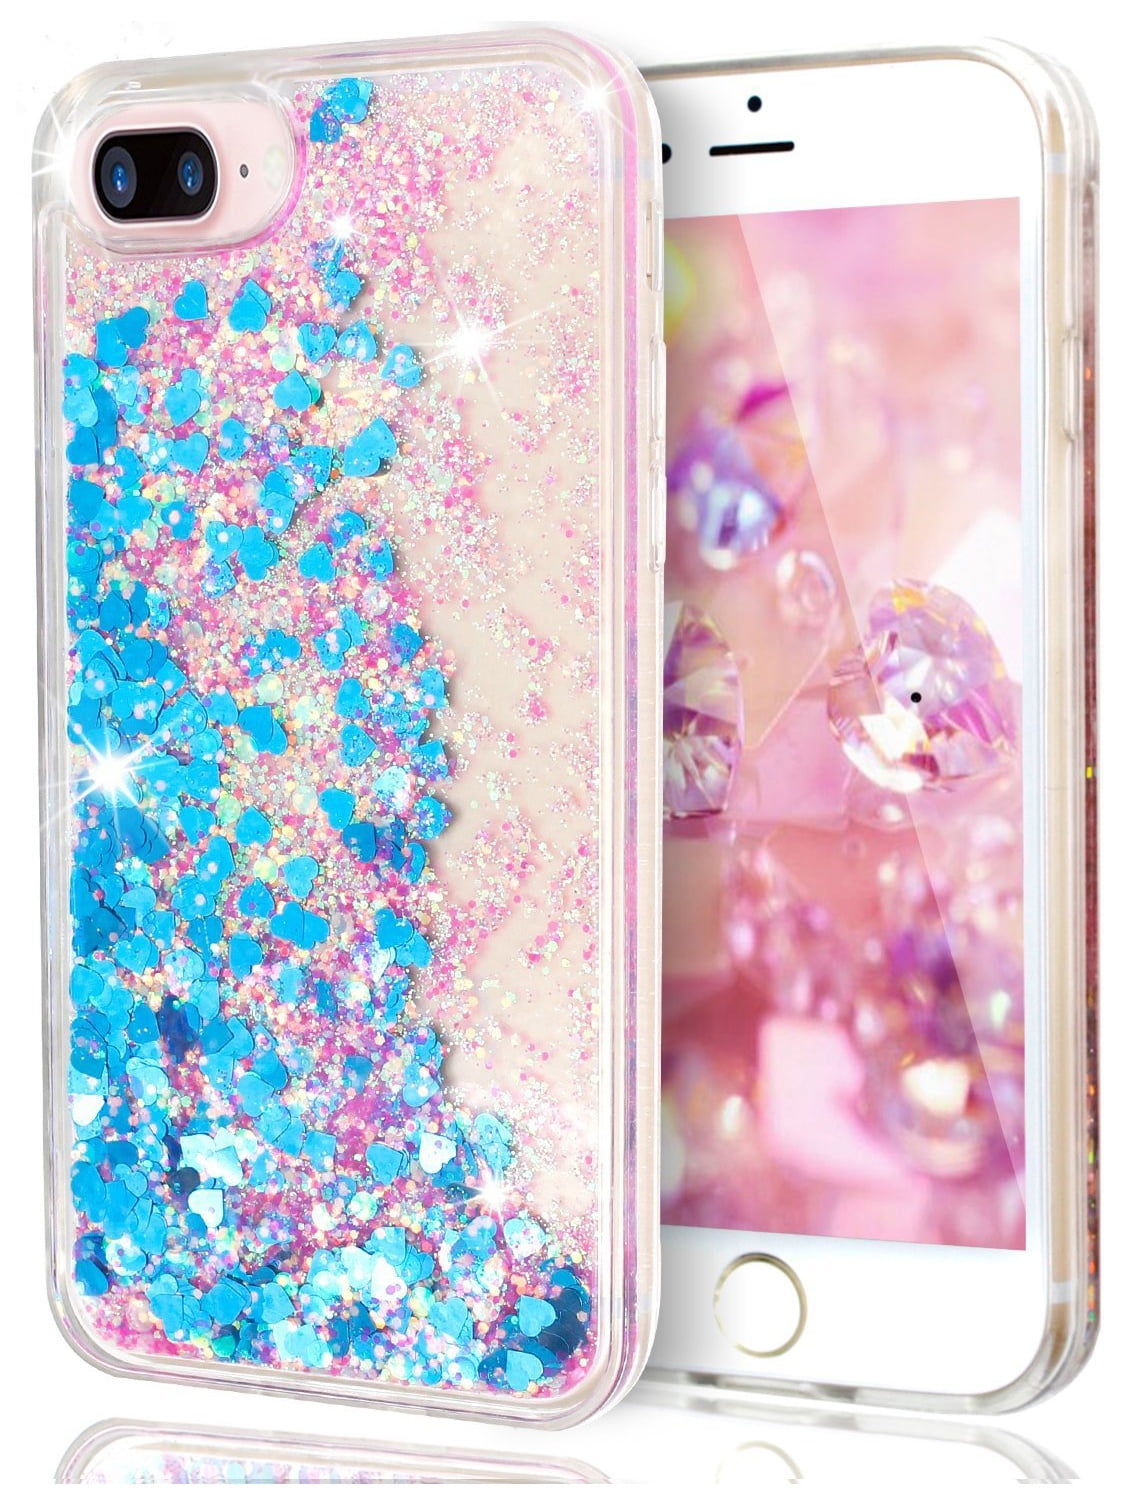 For iPhone 5 iPhone 5s iPhone SE Blue Floating Hearts Liquid Waterfall Sparkle Glitter Quicksand - Walmart.com